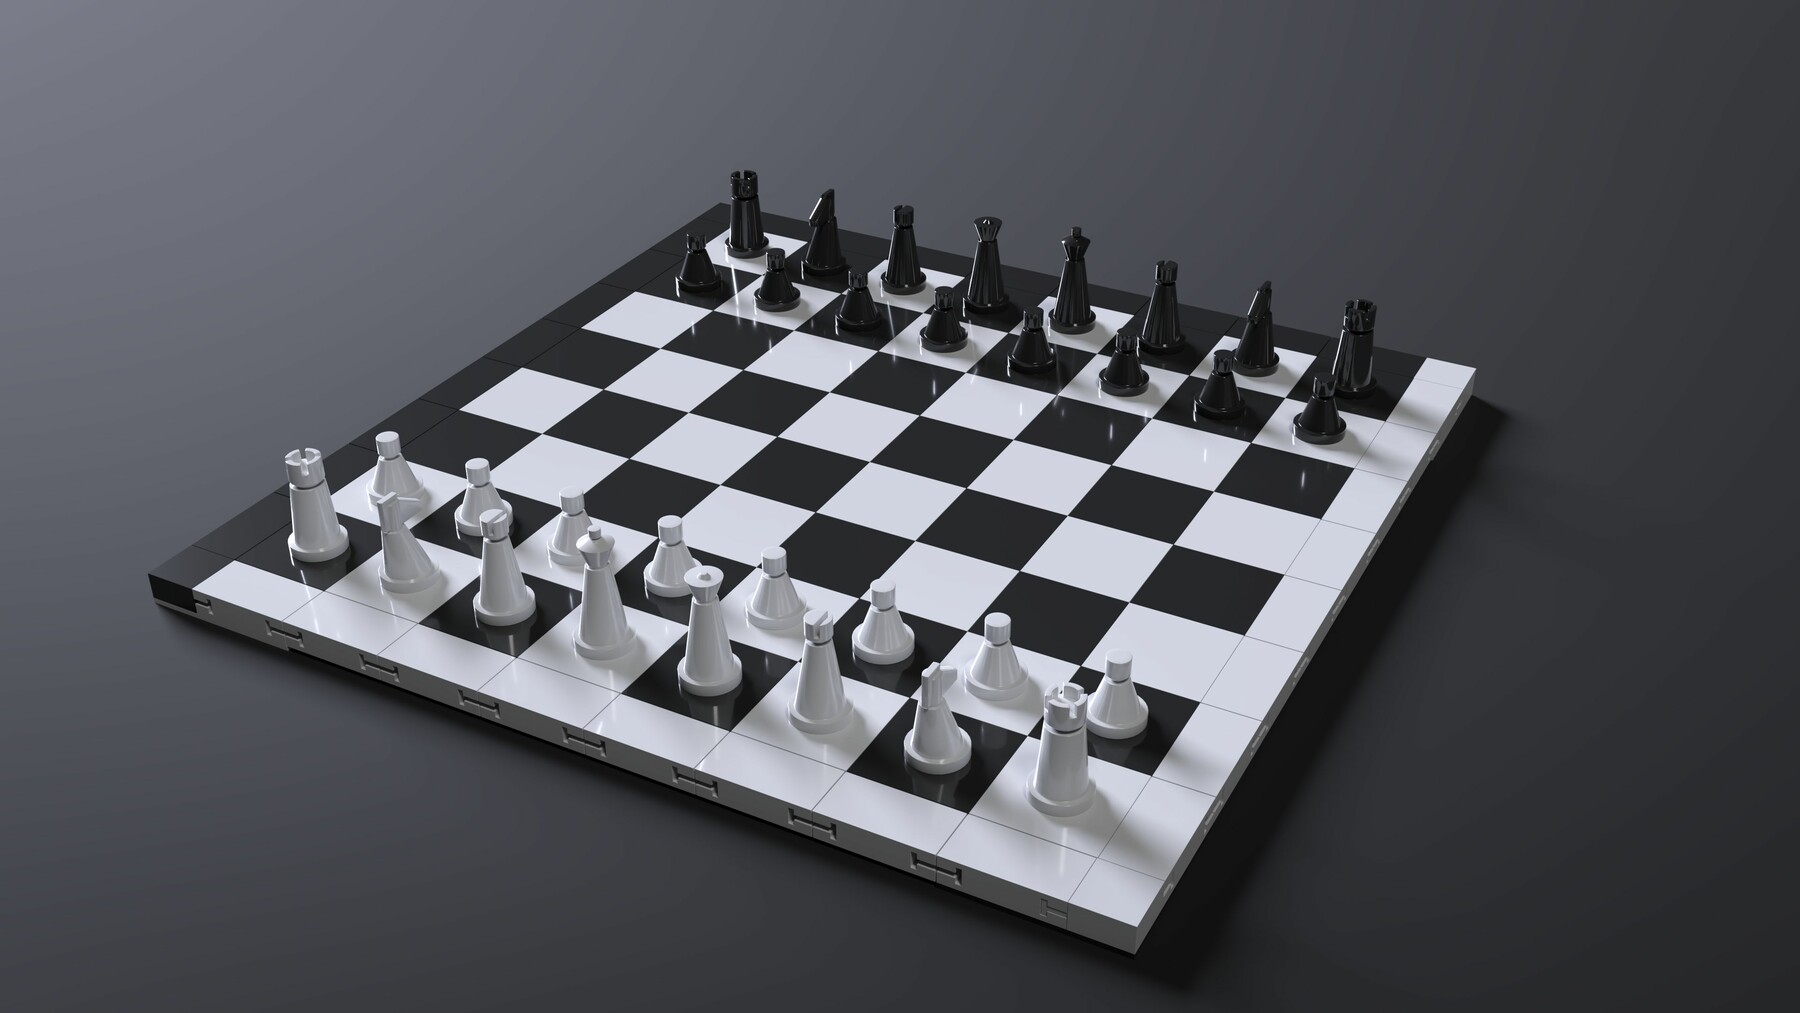 How many arrangements of chess pieces on a chess board are there